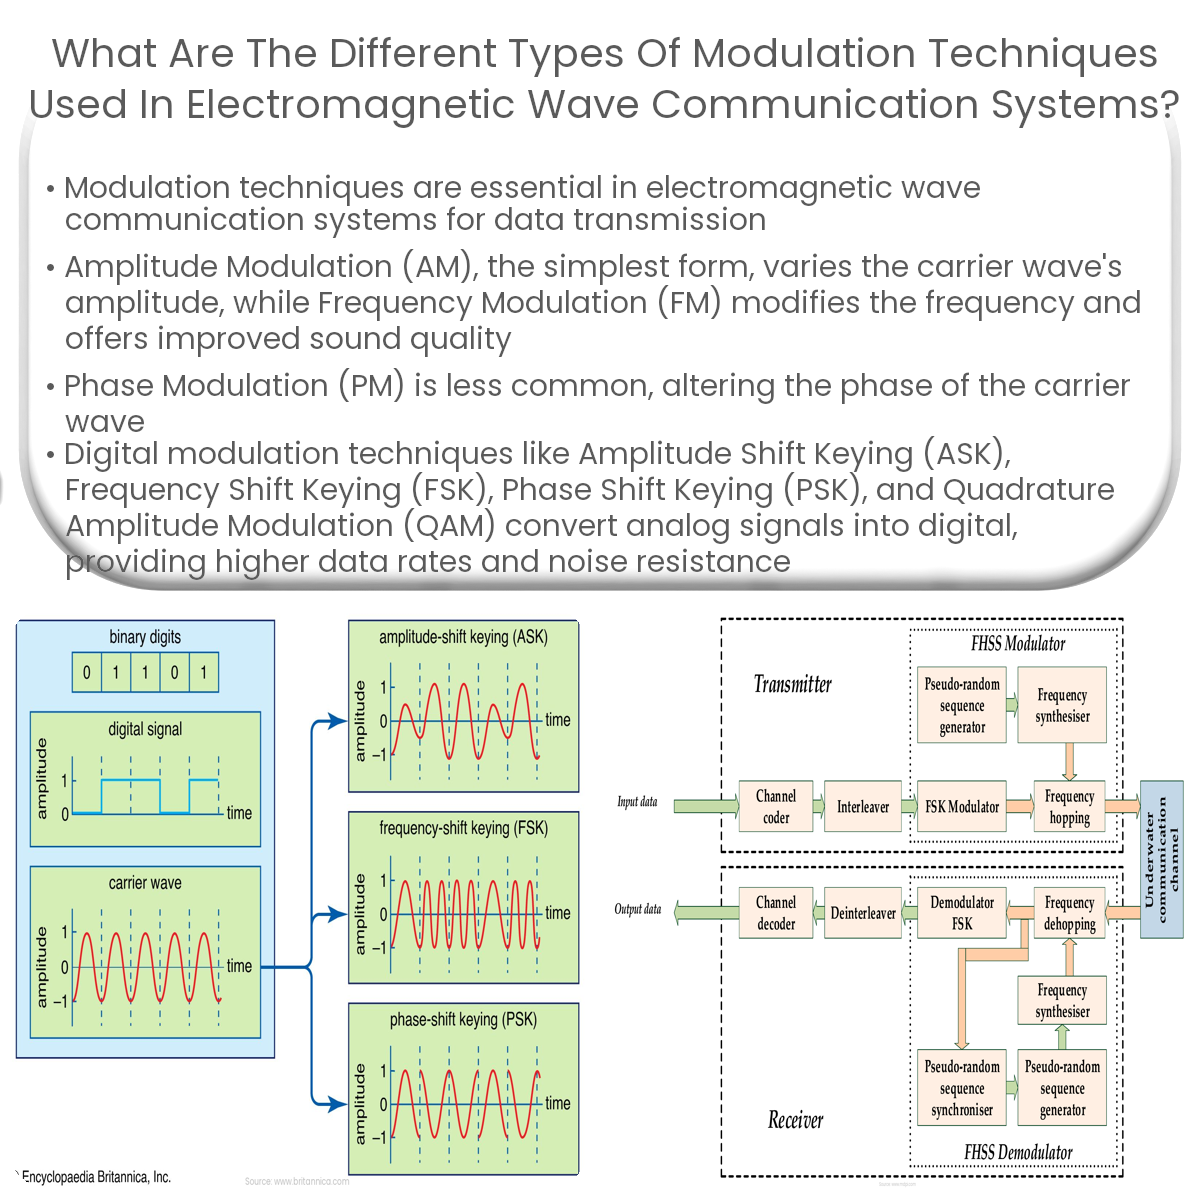 What are the different types of modulation techniques used in electromagnetic wave communication systems?